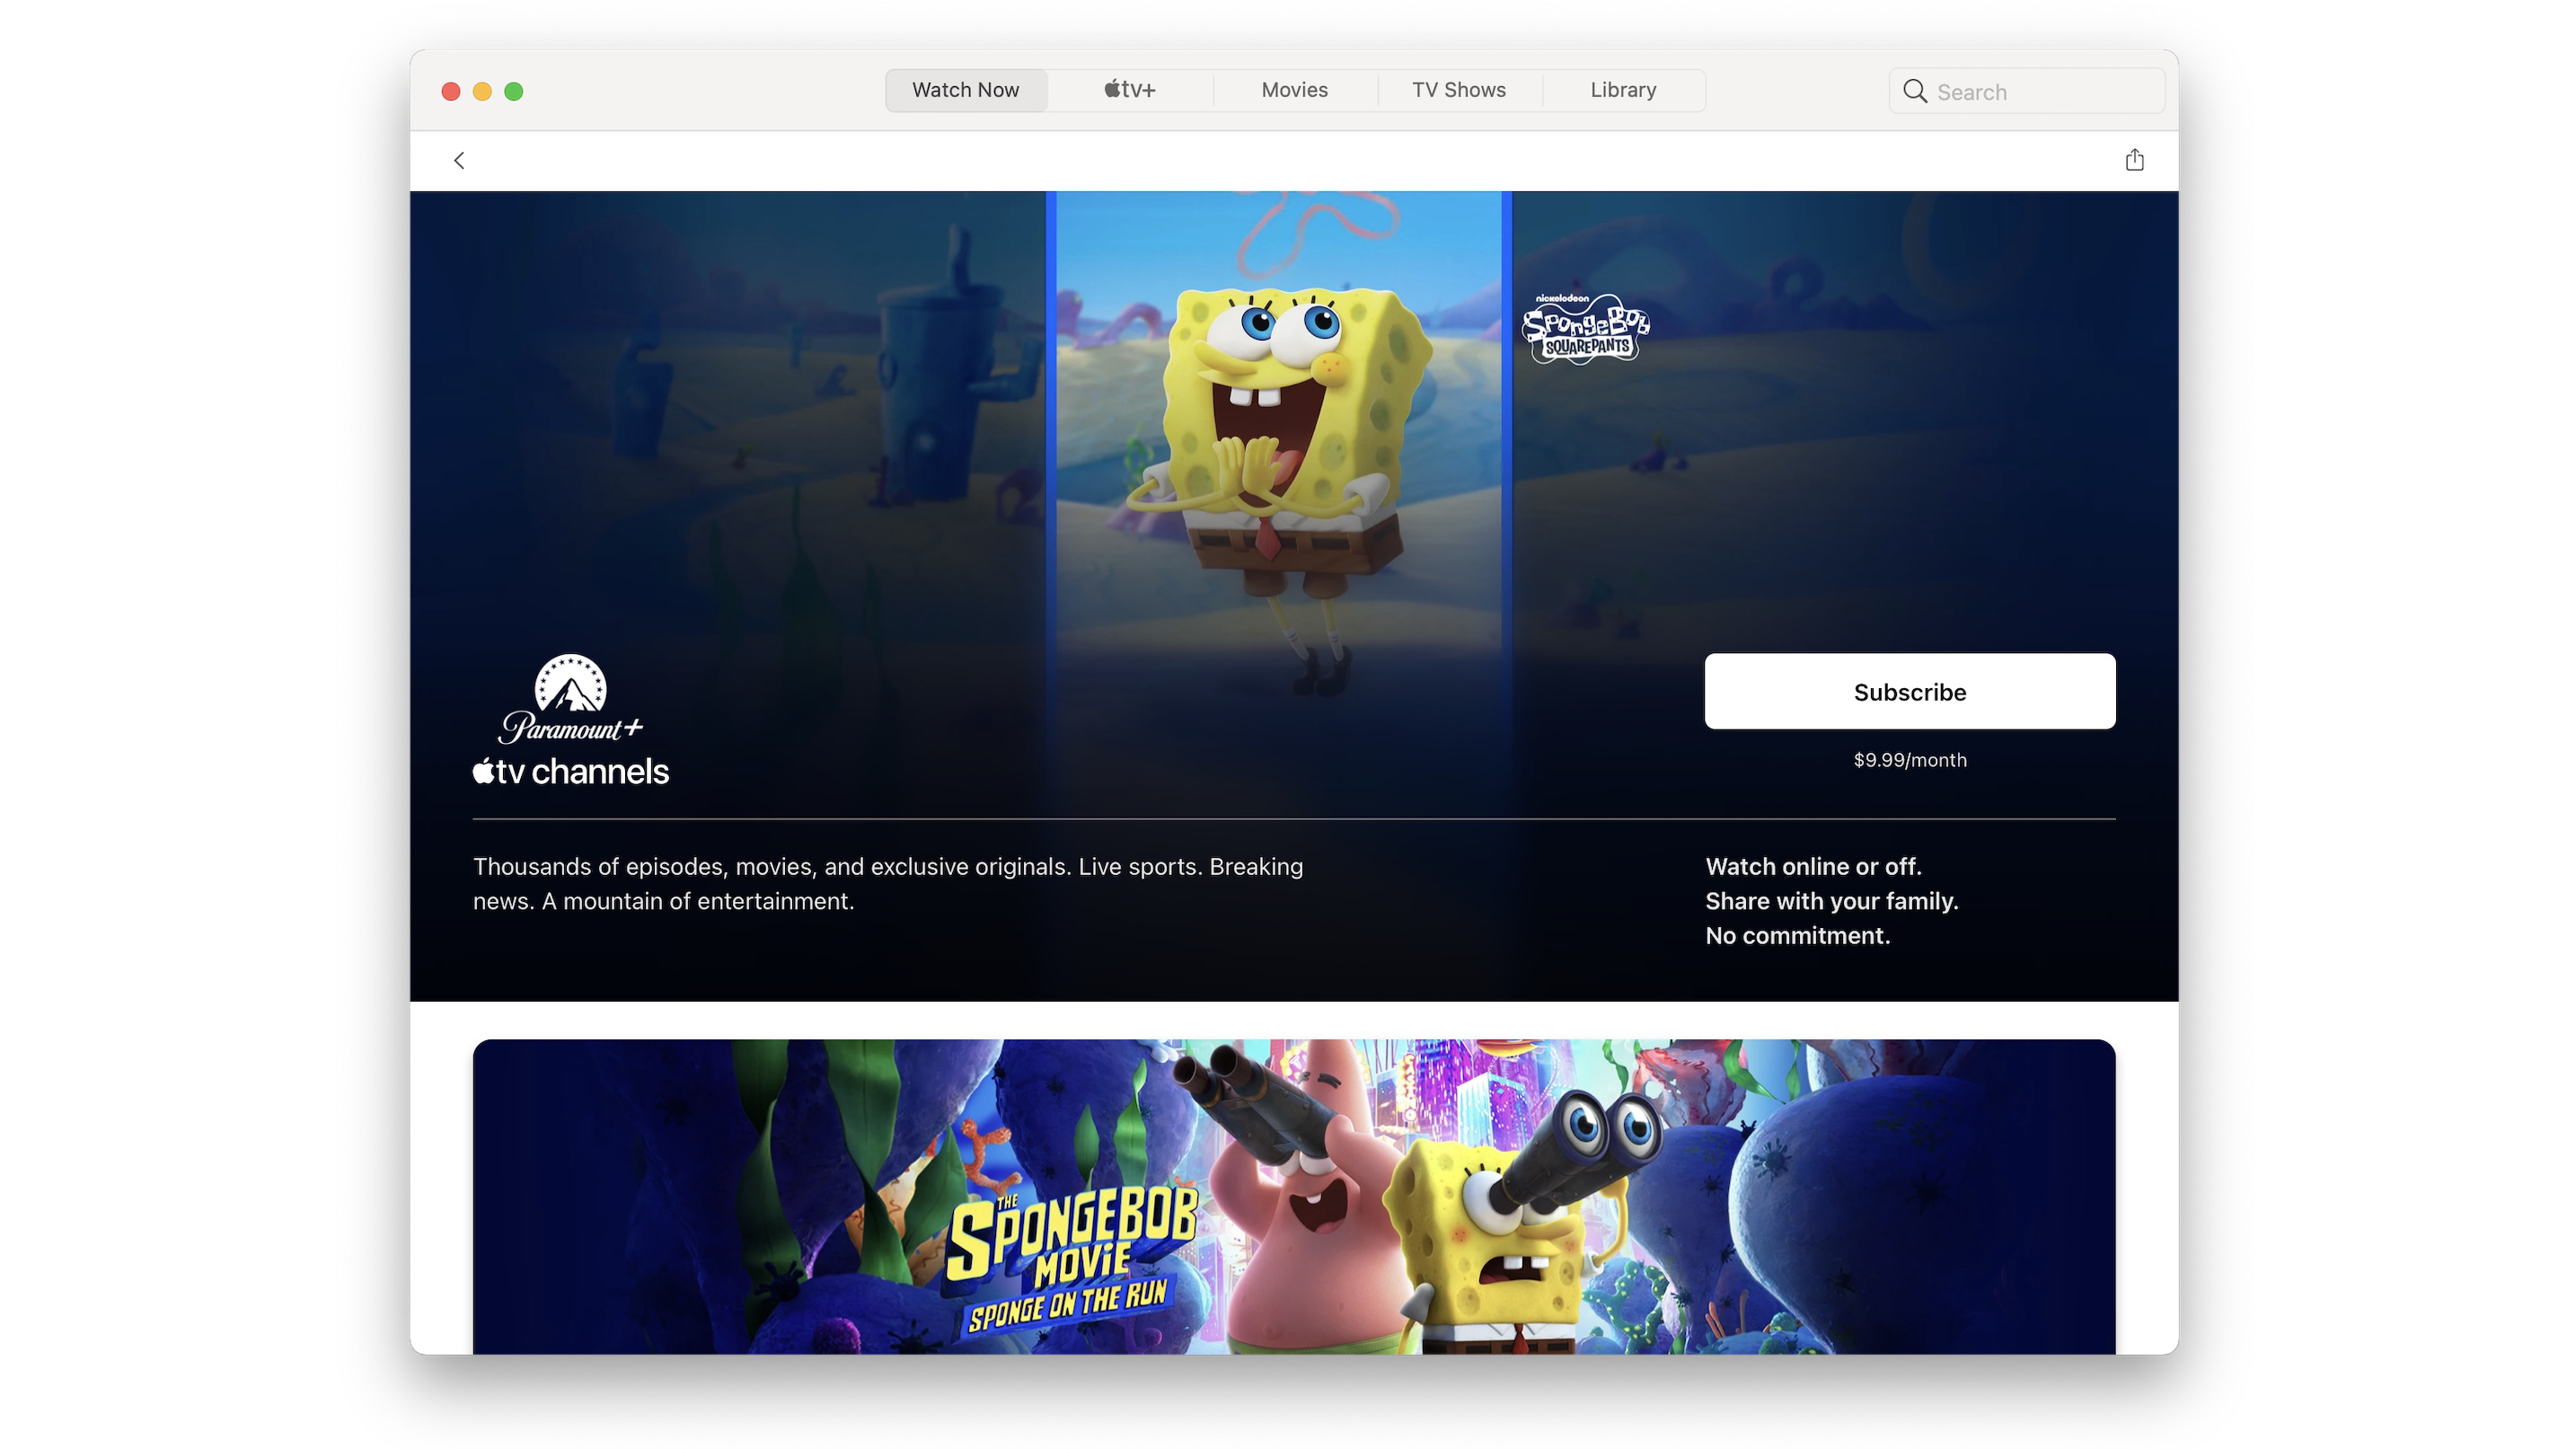 hbo now on pc via itunes stores